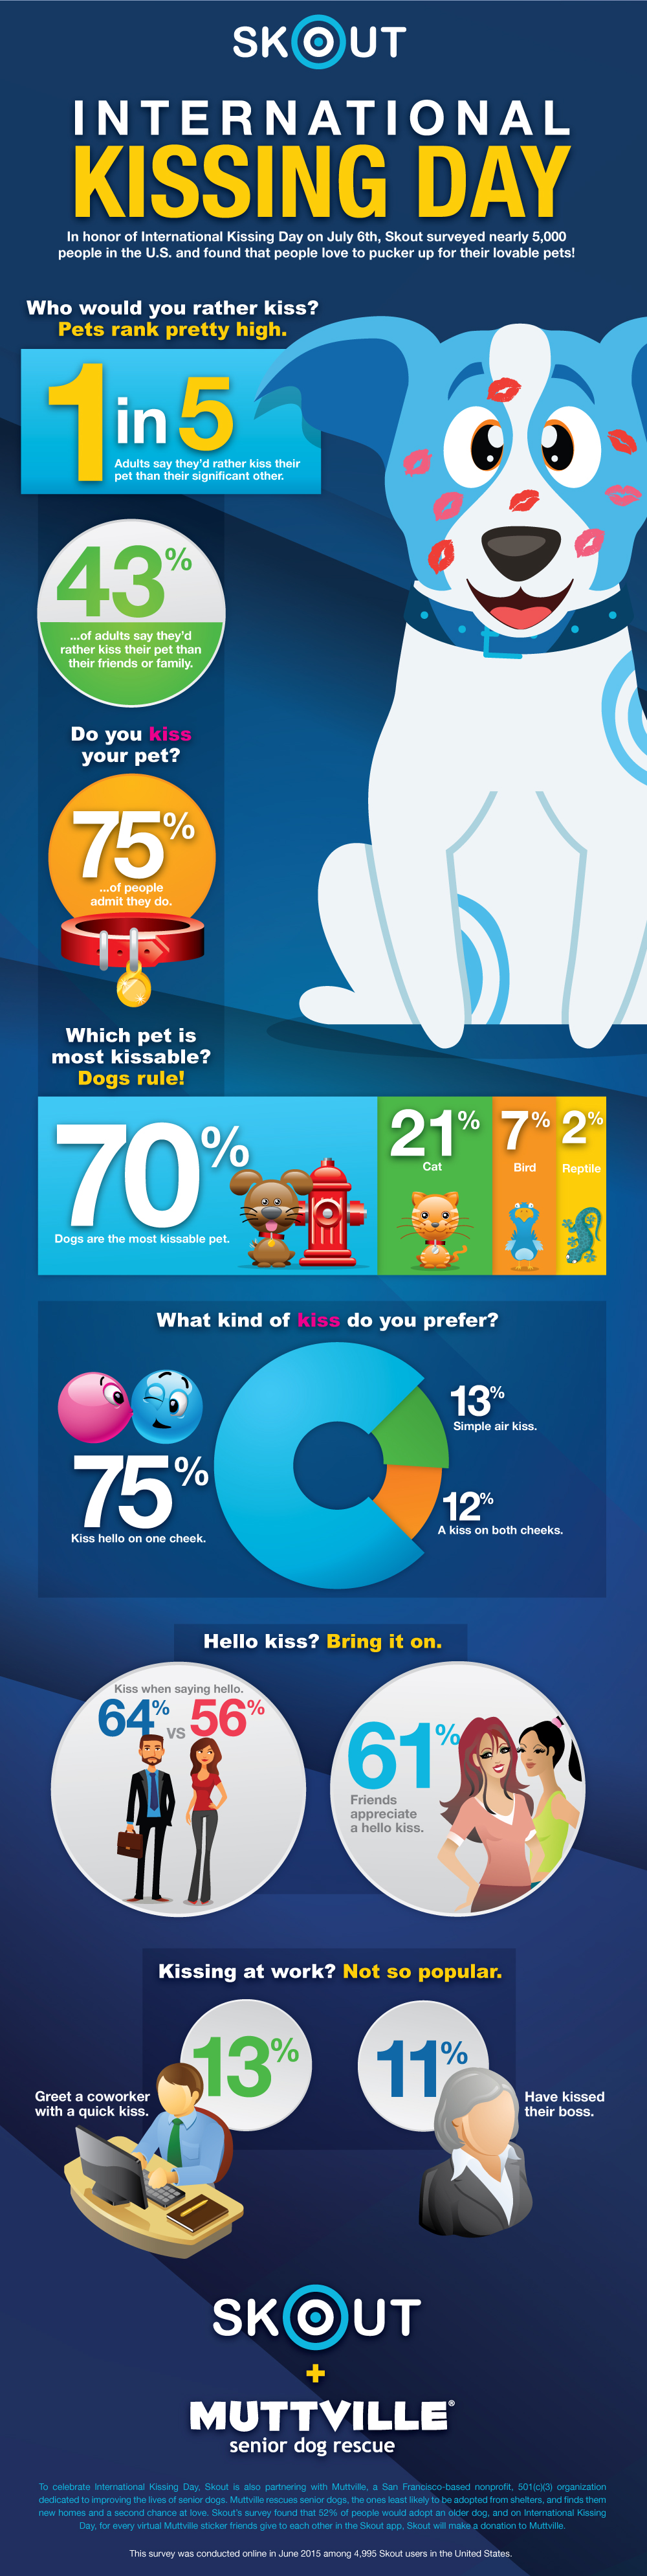 Skout International Kissing Day Infographic